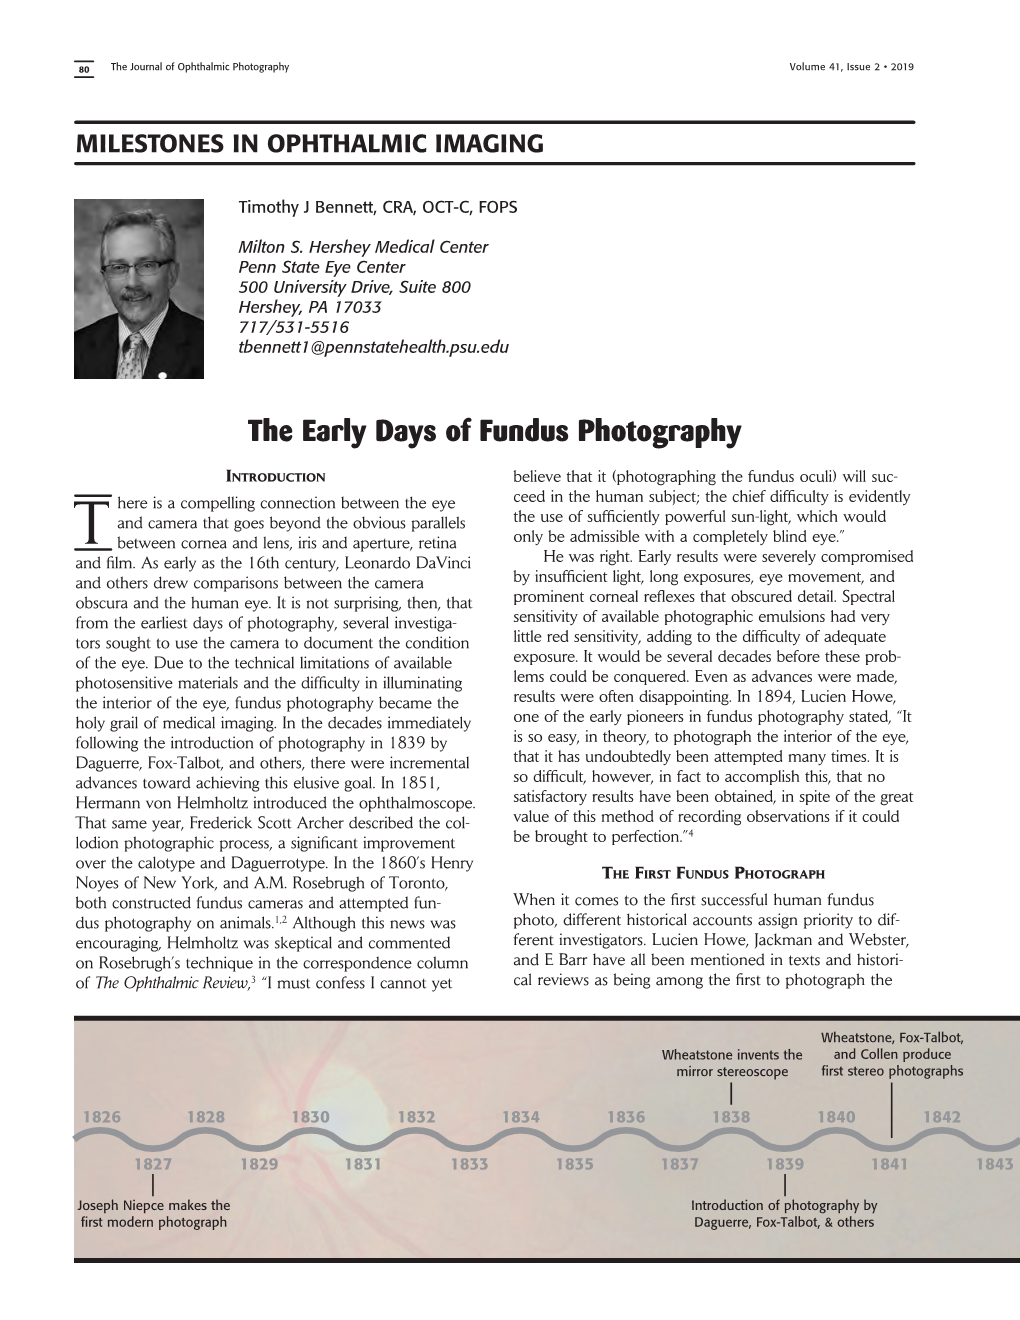 The Early Days of Fundus Photography